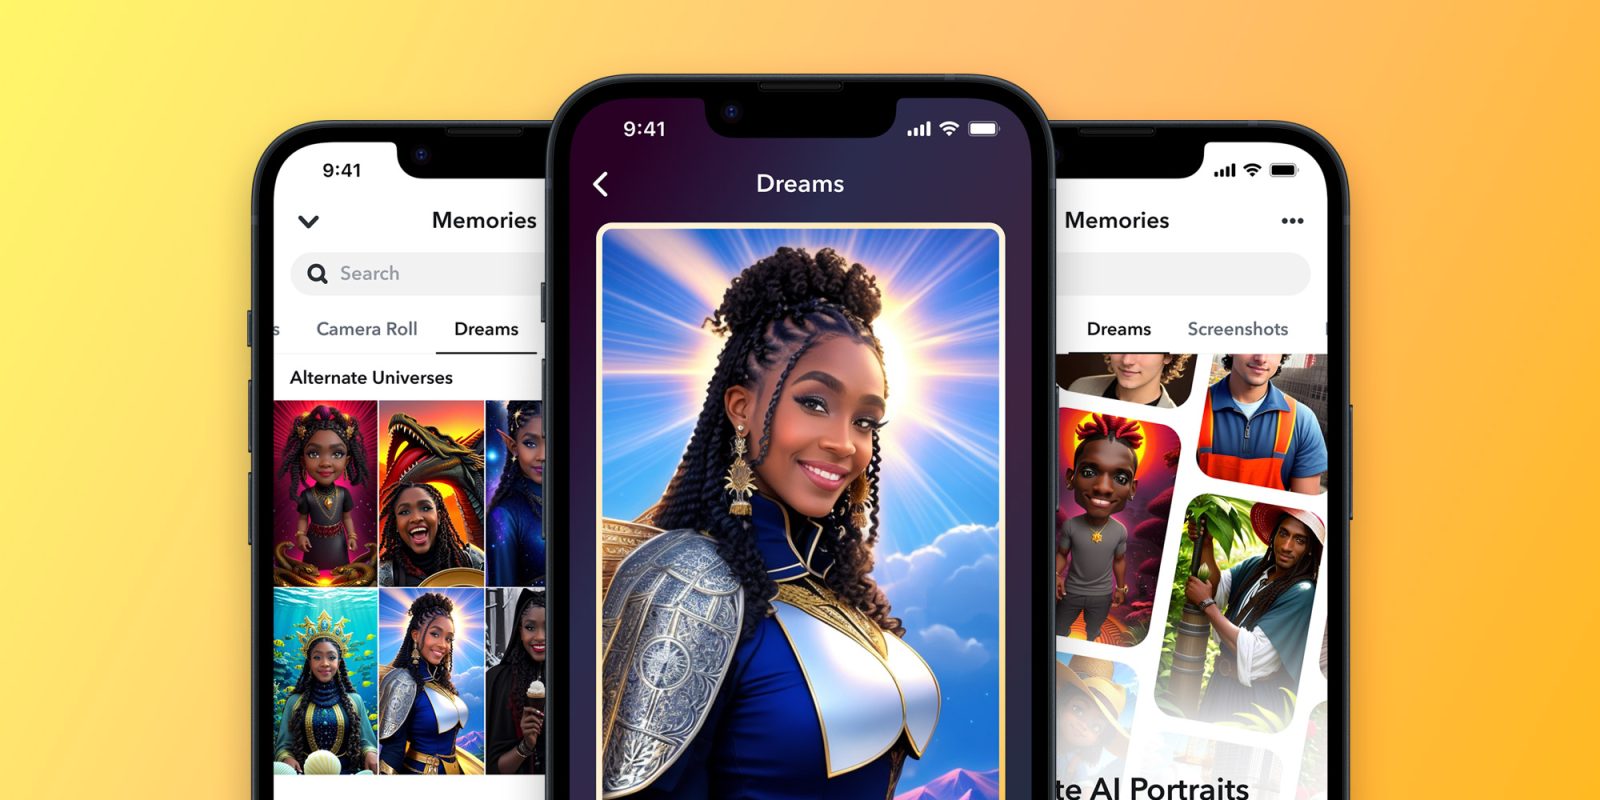 Snapchat introduces new 'Dreams' feature to generate photos with AI